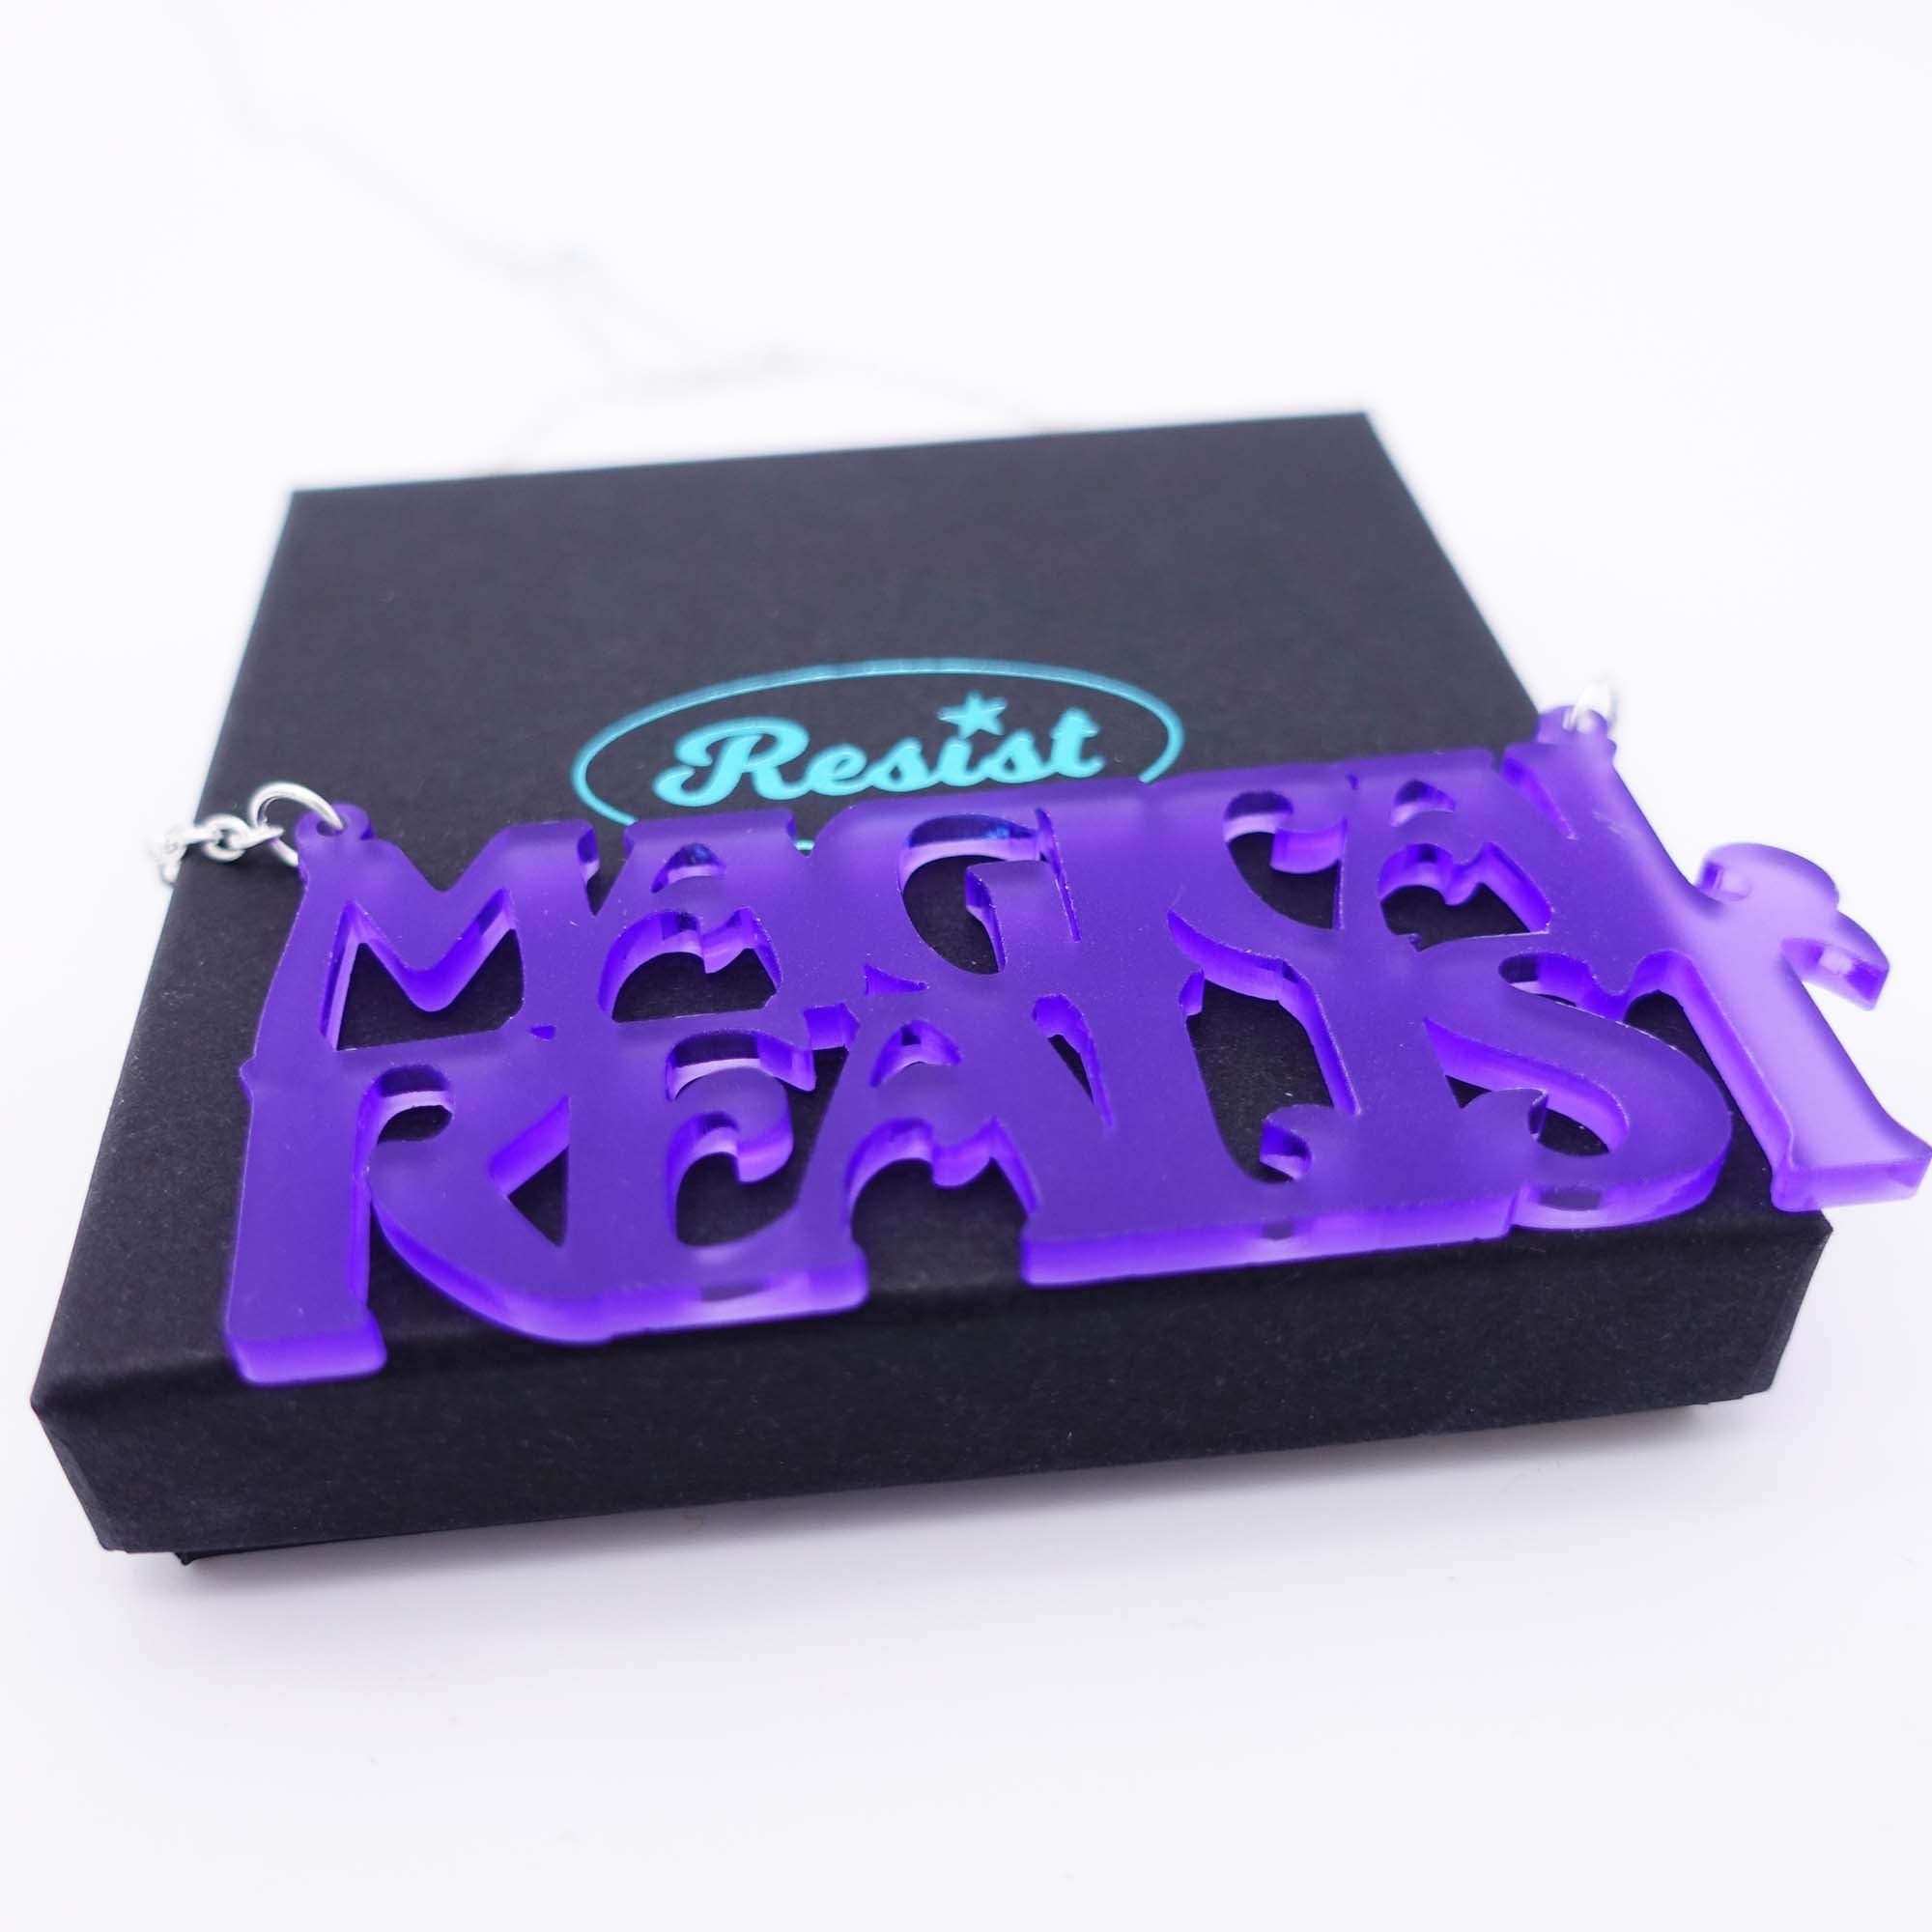 violet frost magical realist necklace for writers and book lovers shown on box